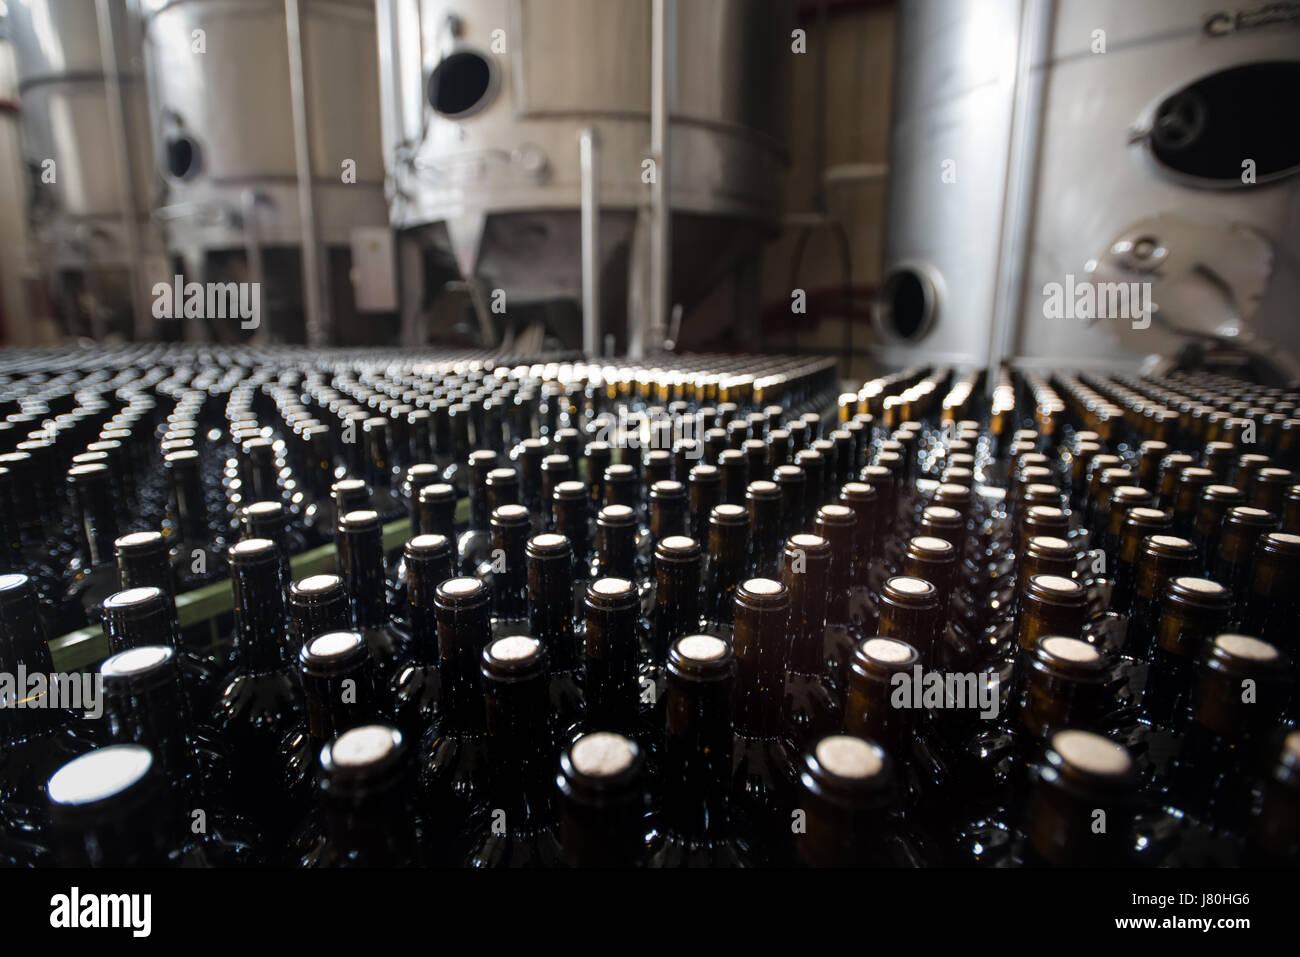 Bottles of unlabeled red wine stand in rows inside a winery. Stock Photo